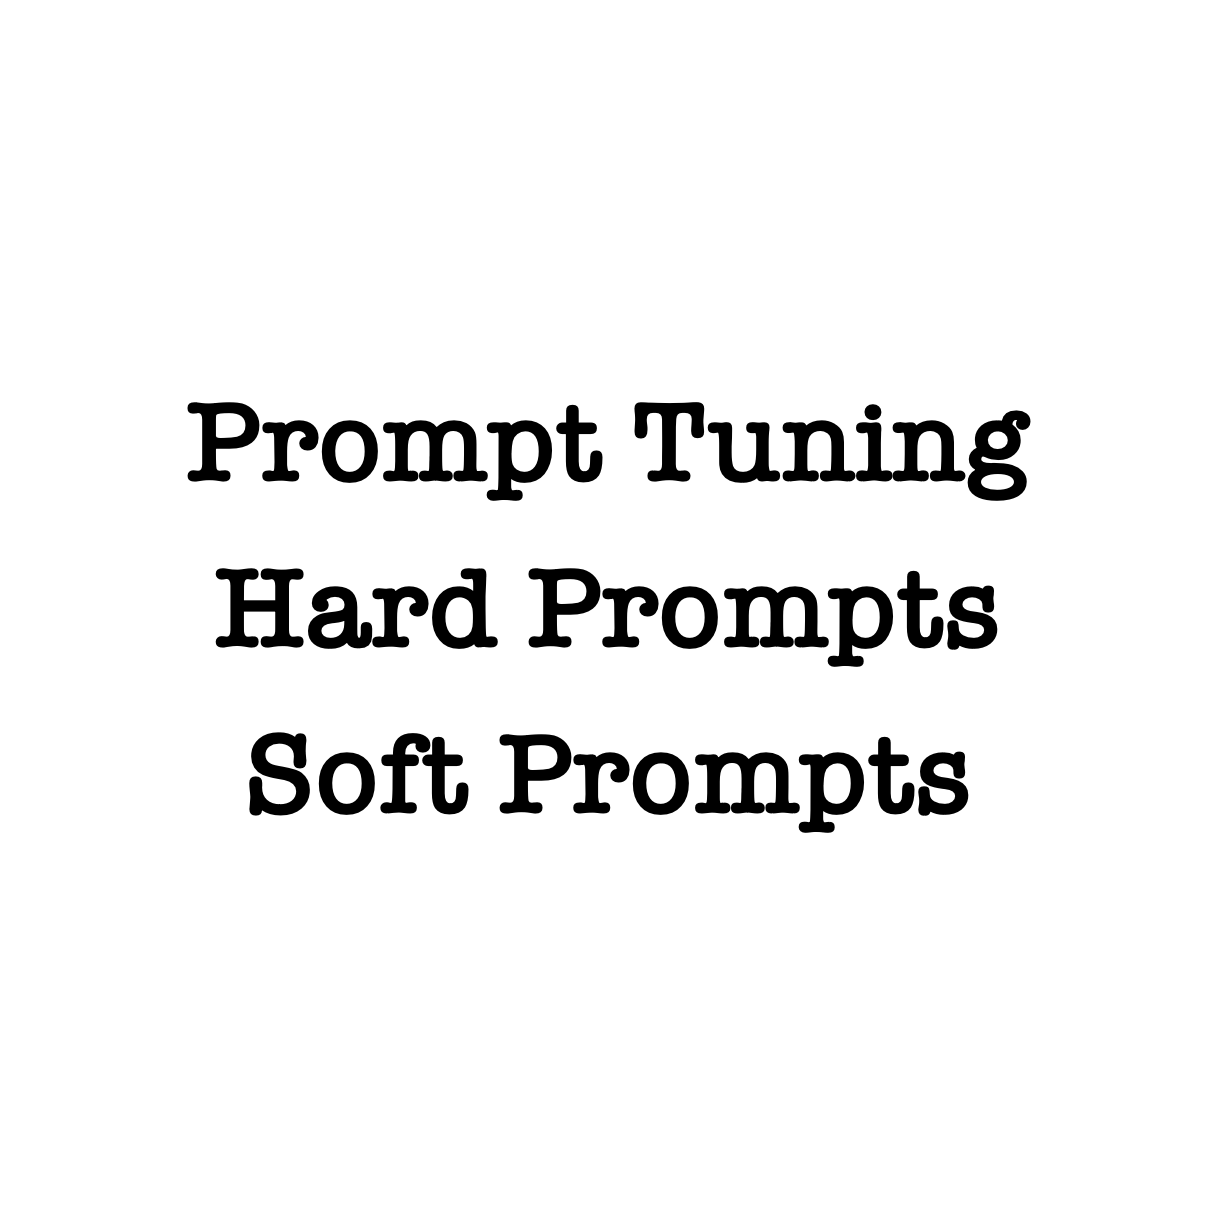 Prompt Tuning, Hard Prompts & Soft Prompts